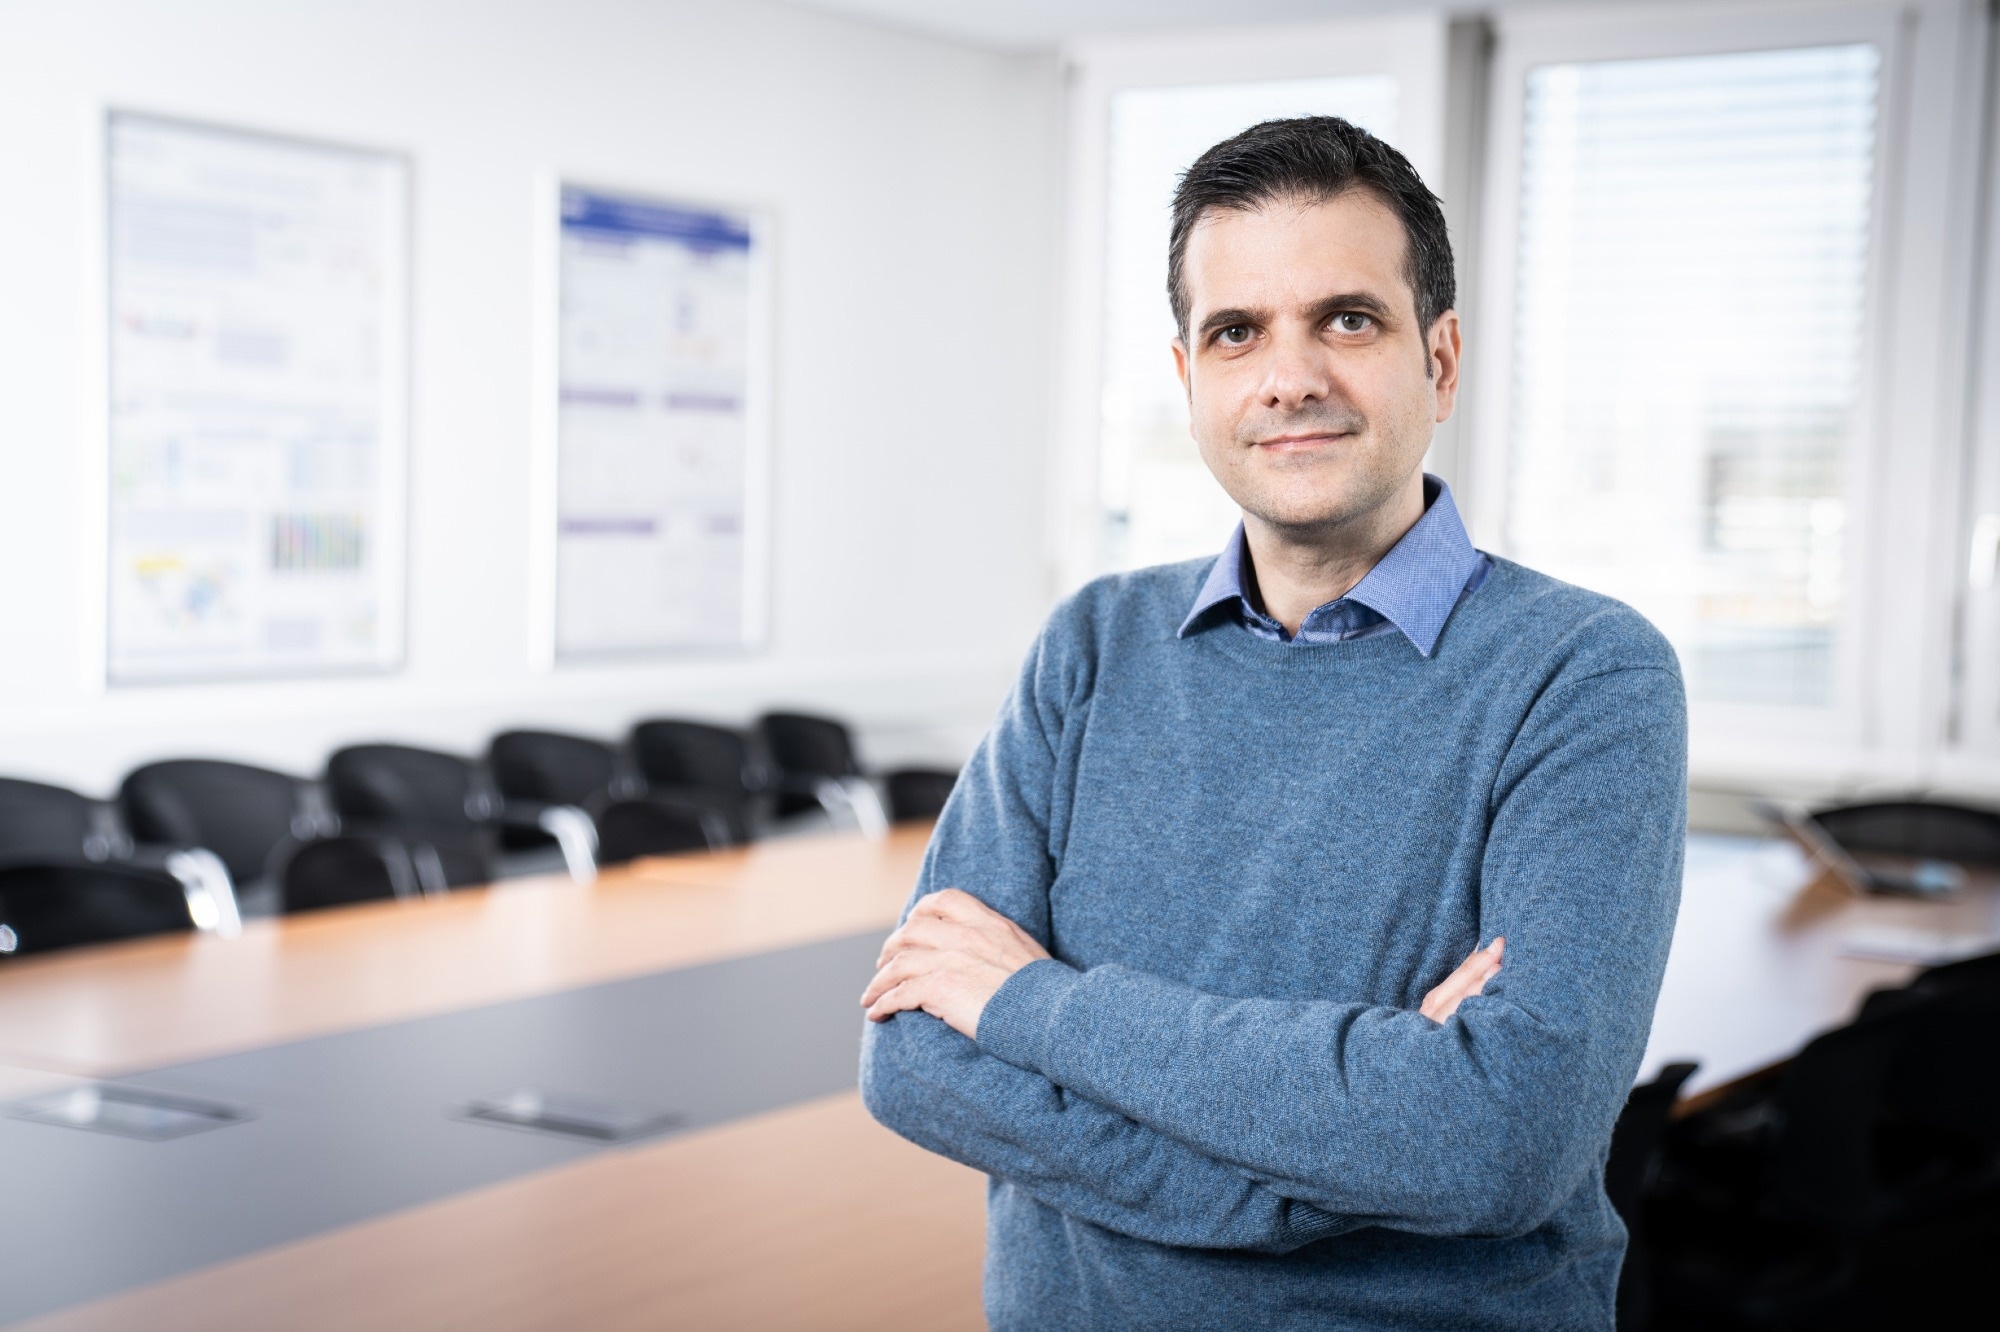 Evangelos Panos uses computer simulations to analyze developments in energy systems at the Paul Scherrer Institute.